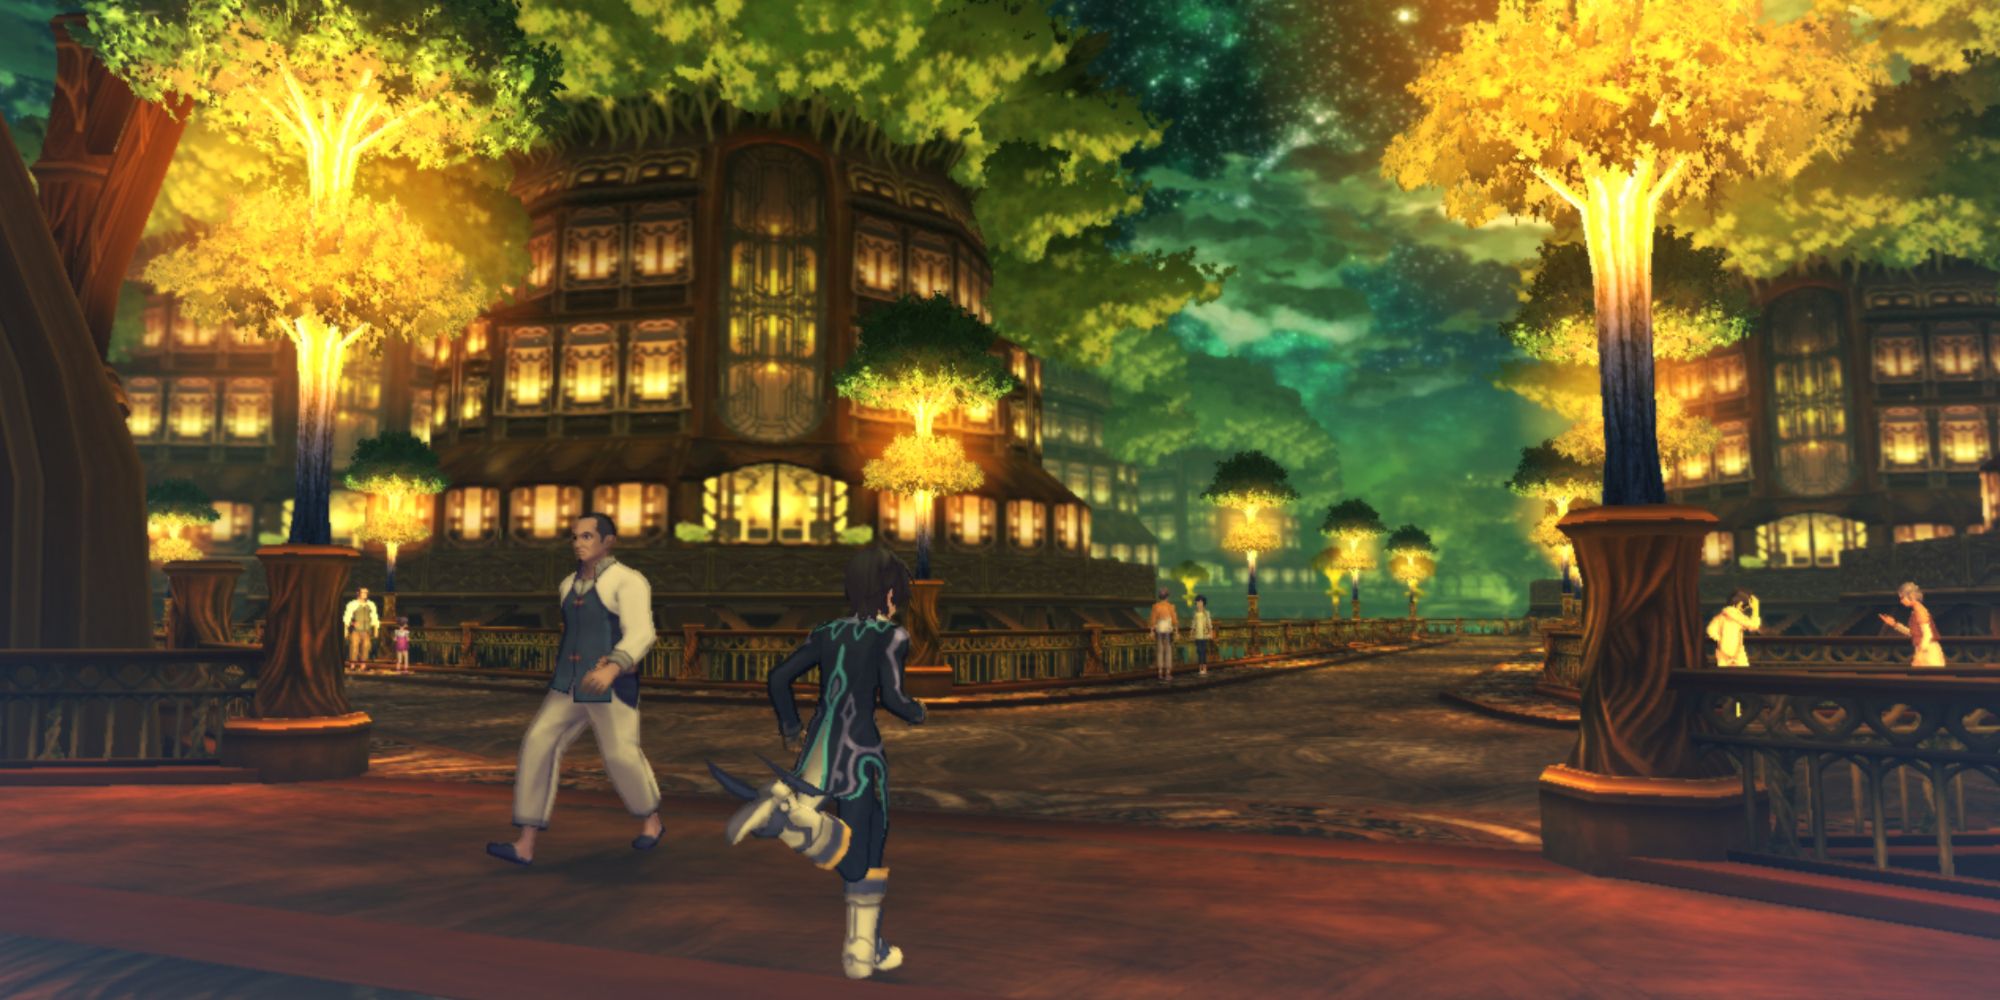 Running through the city in Tales of Xillia